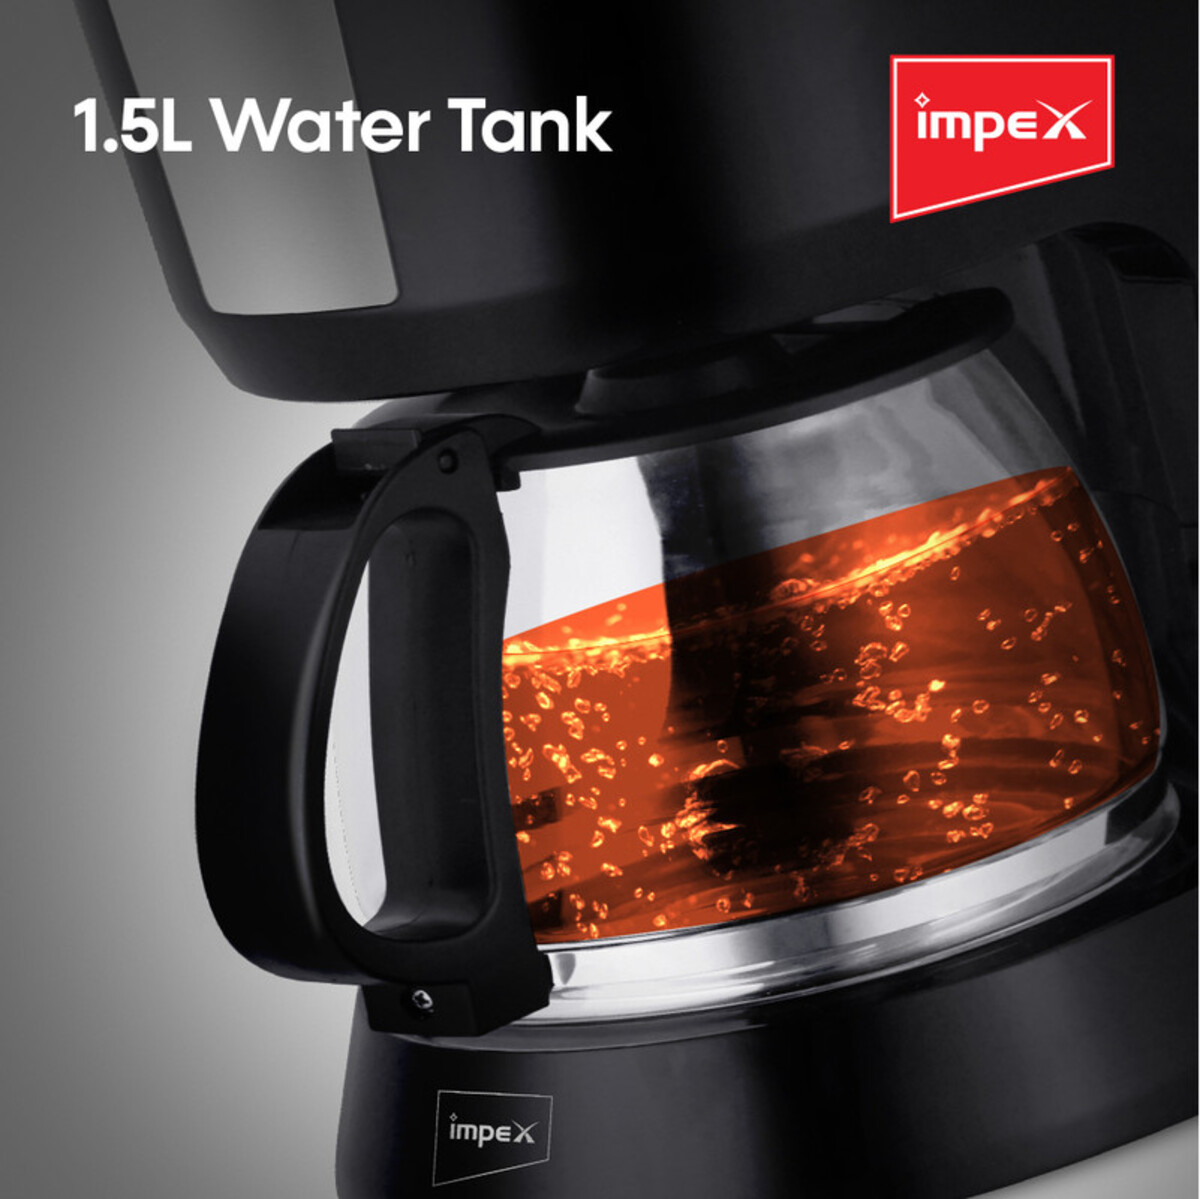 Impex CM 1915 1000 Watts Drip Coffee Maker featuring Anti-Drip Function